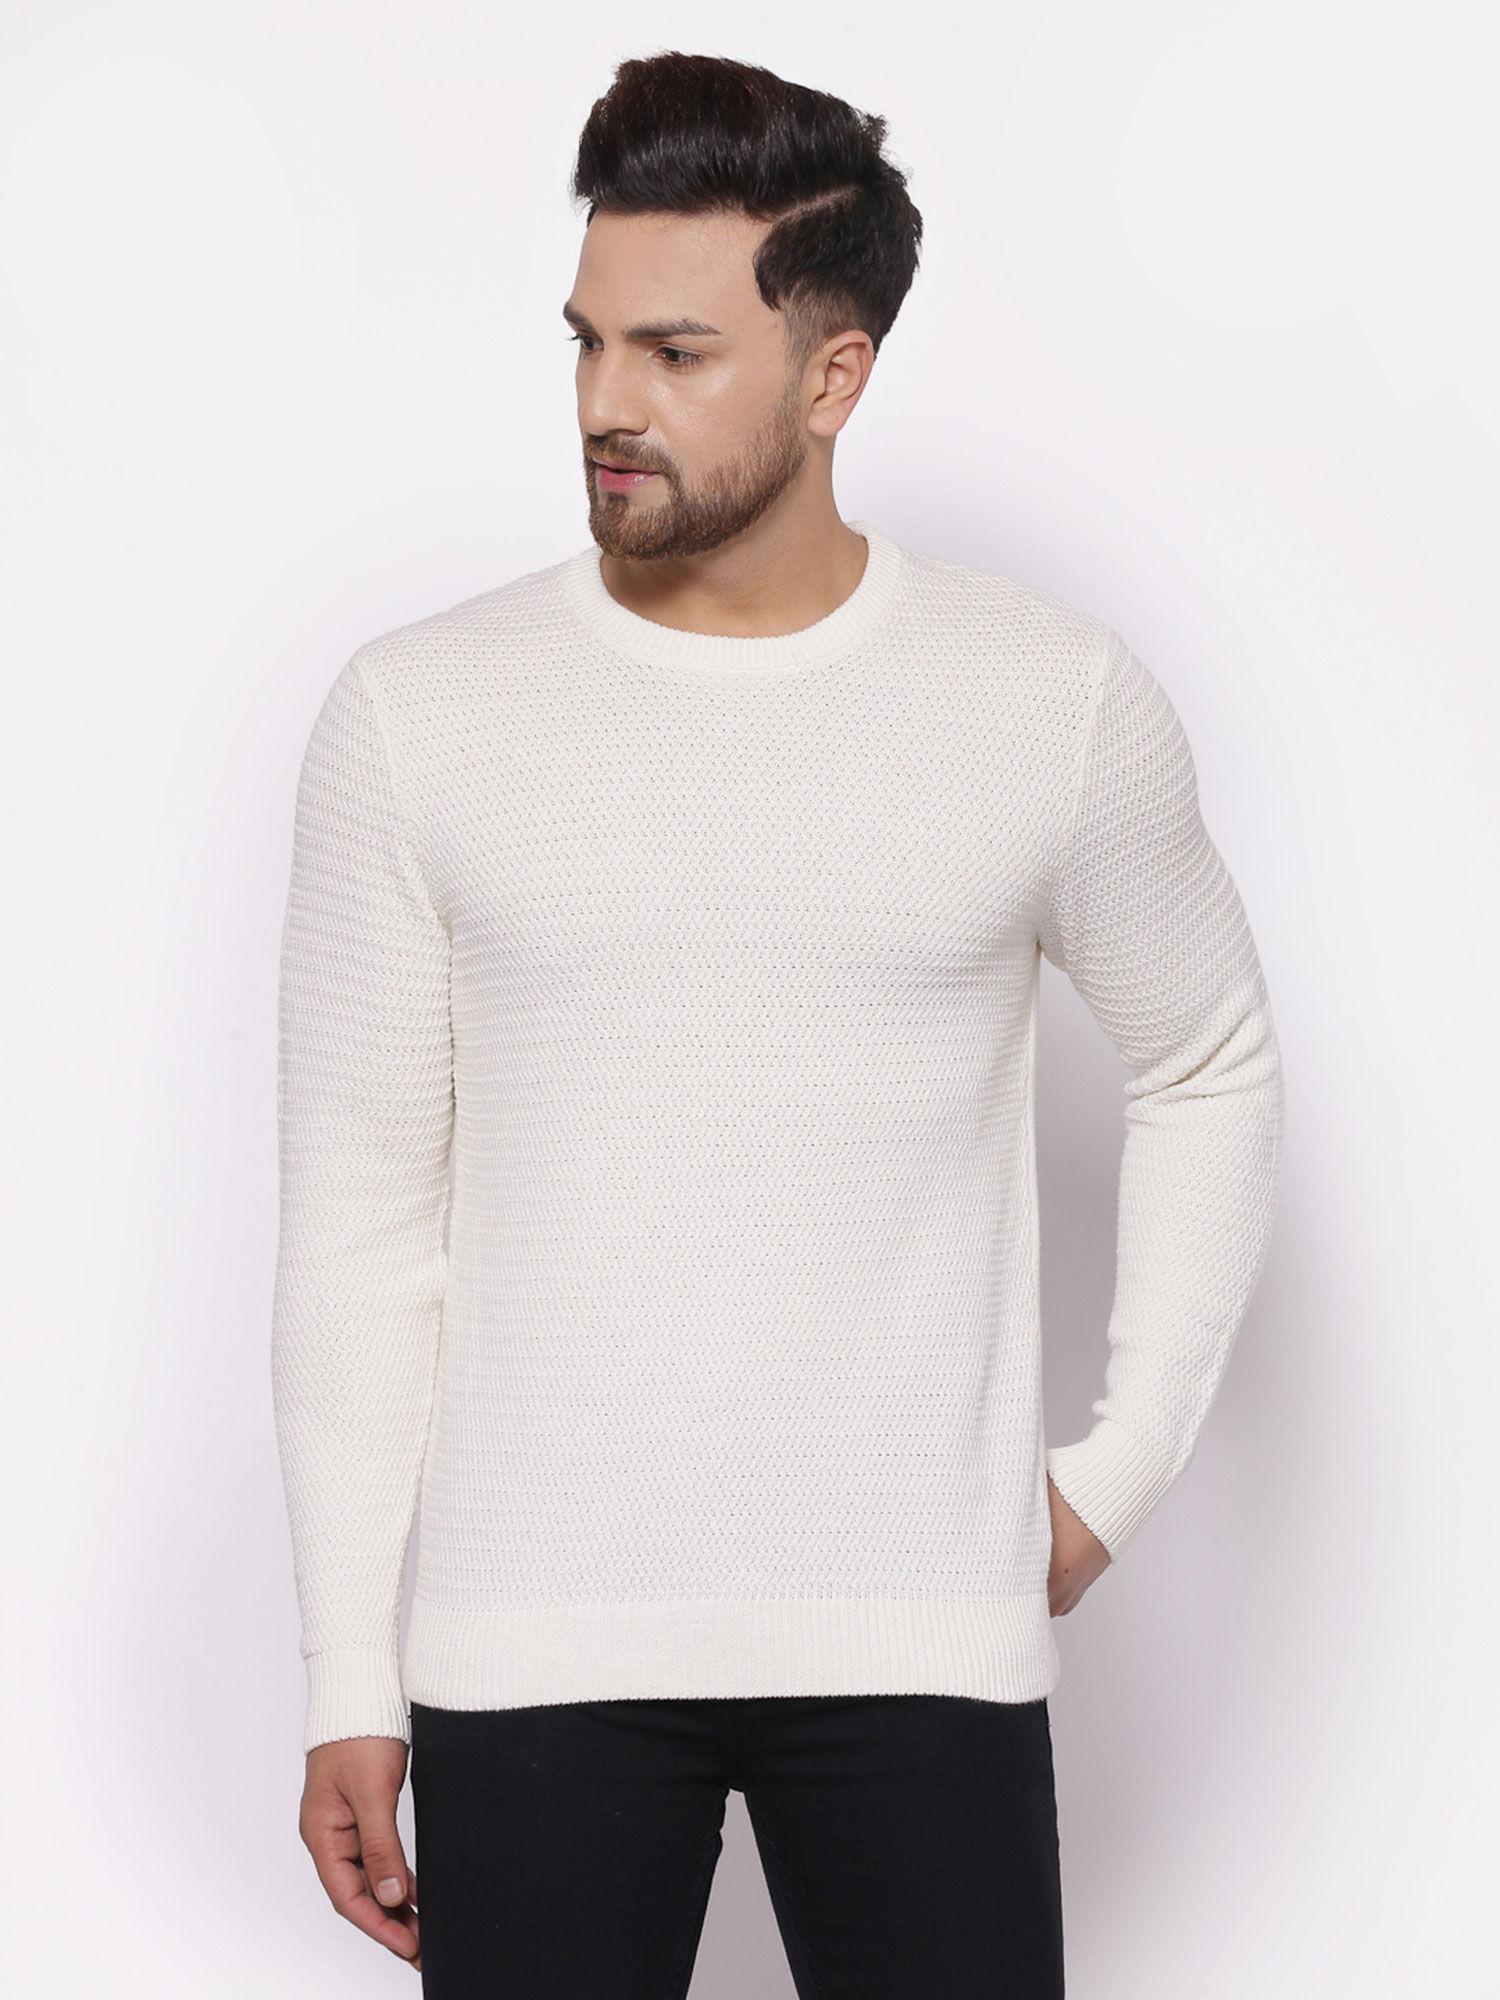 mens off white sweater